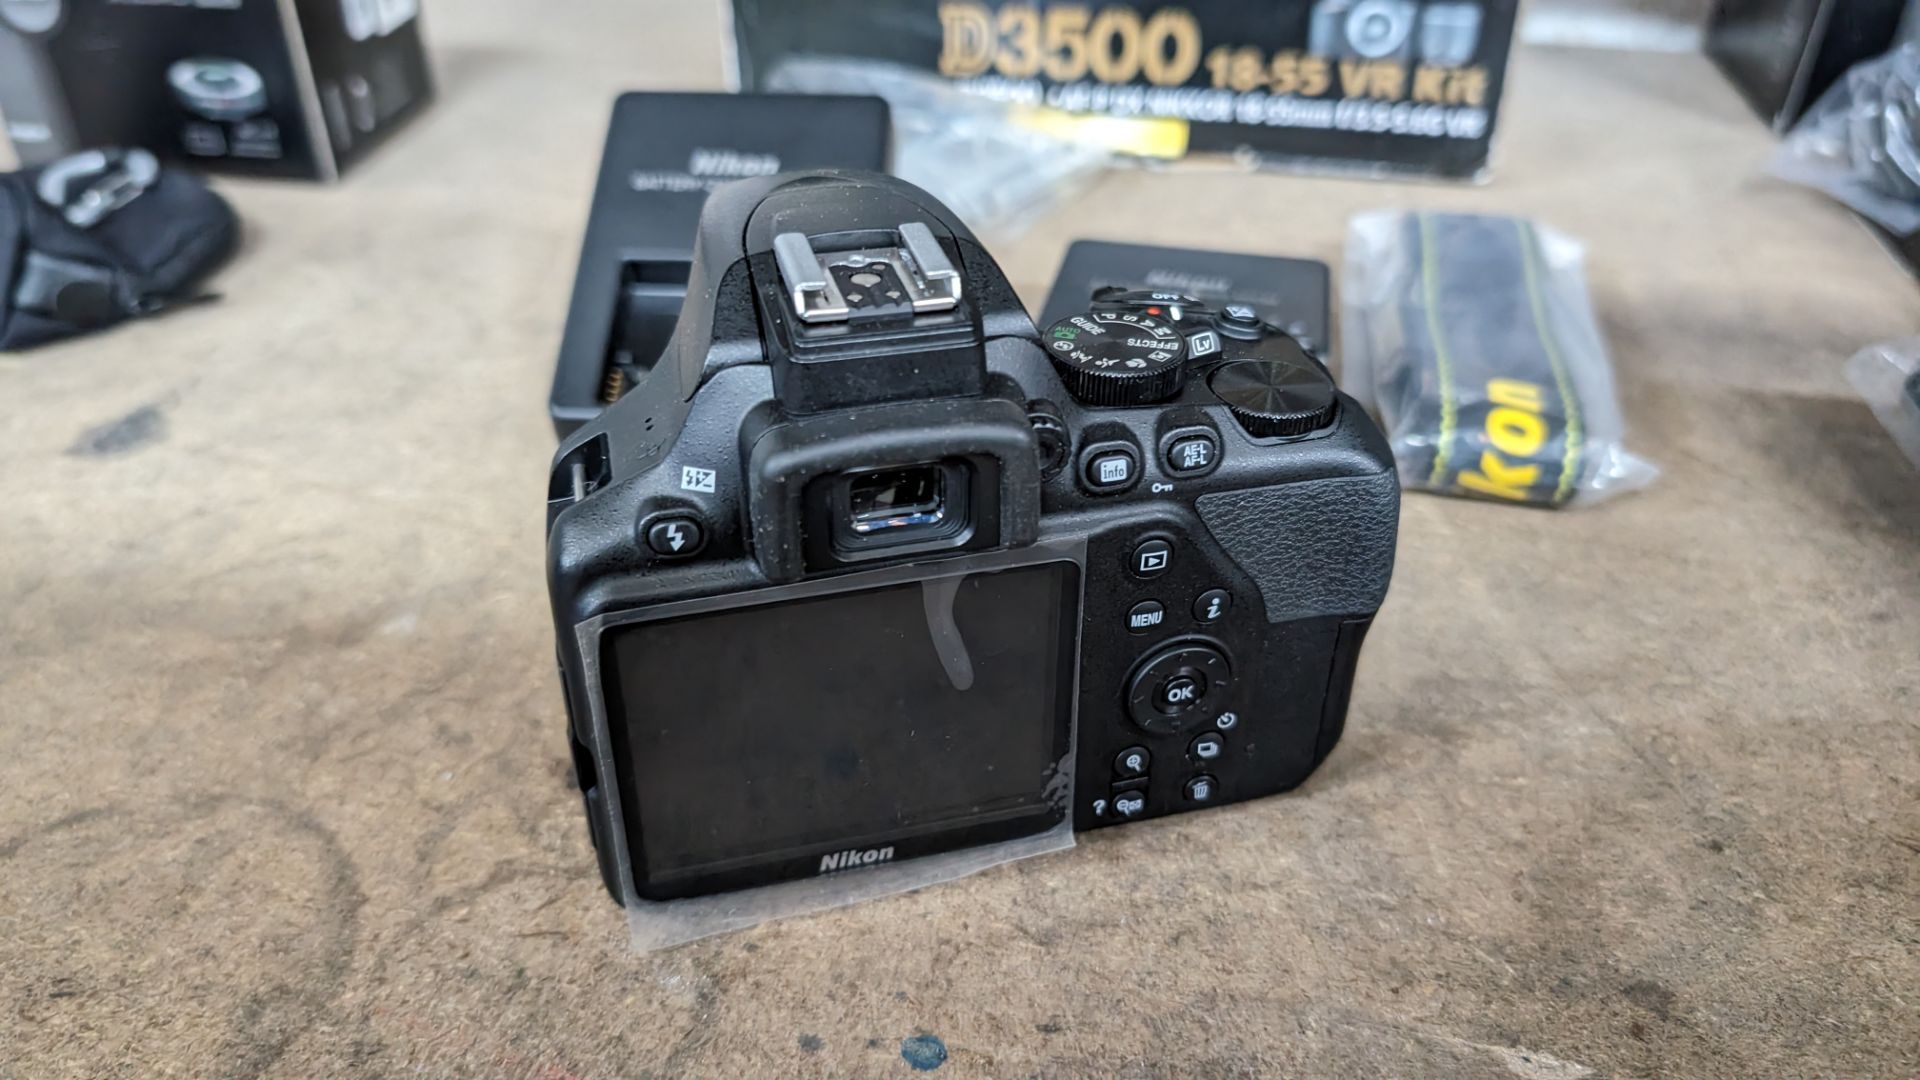 Nikon D3500 camera. Although this camera is in a box for a kit including a lens, this lot just comp - Image 6 of 8